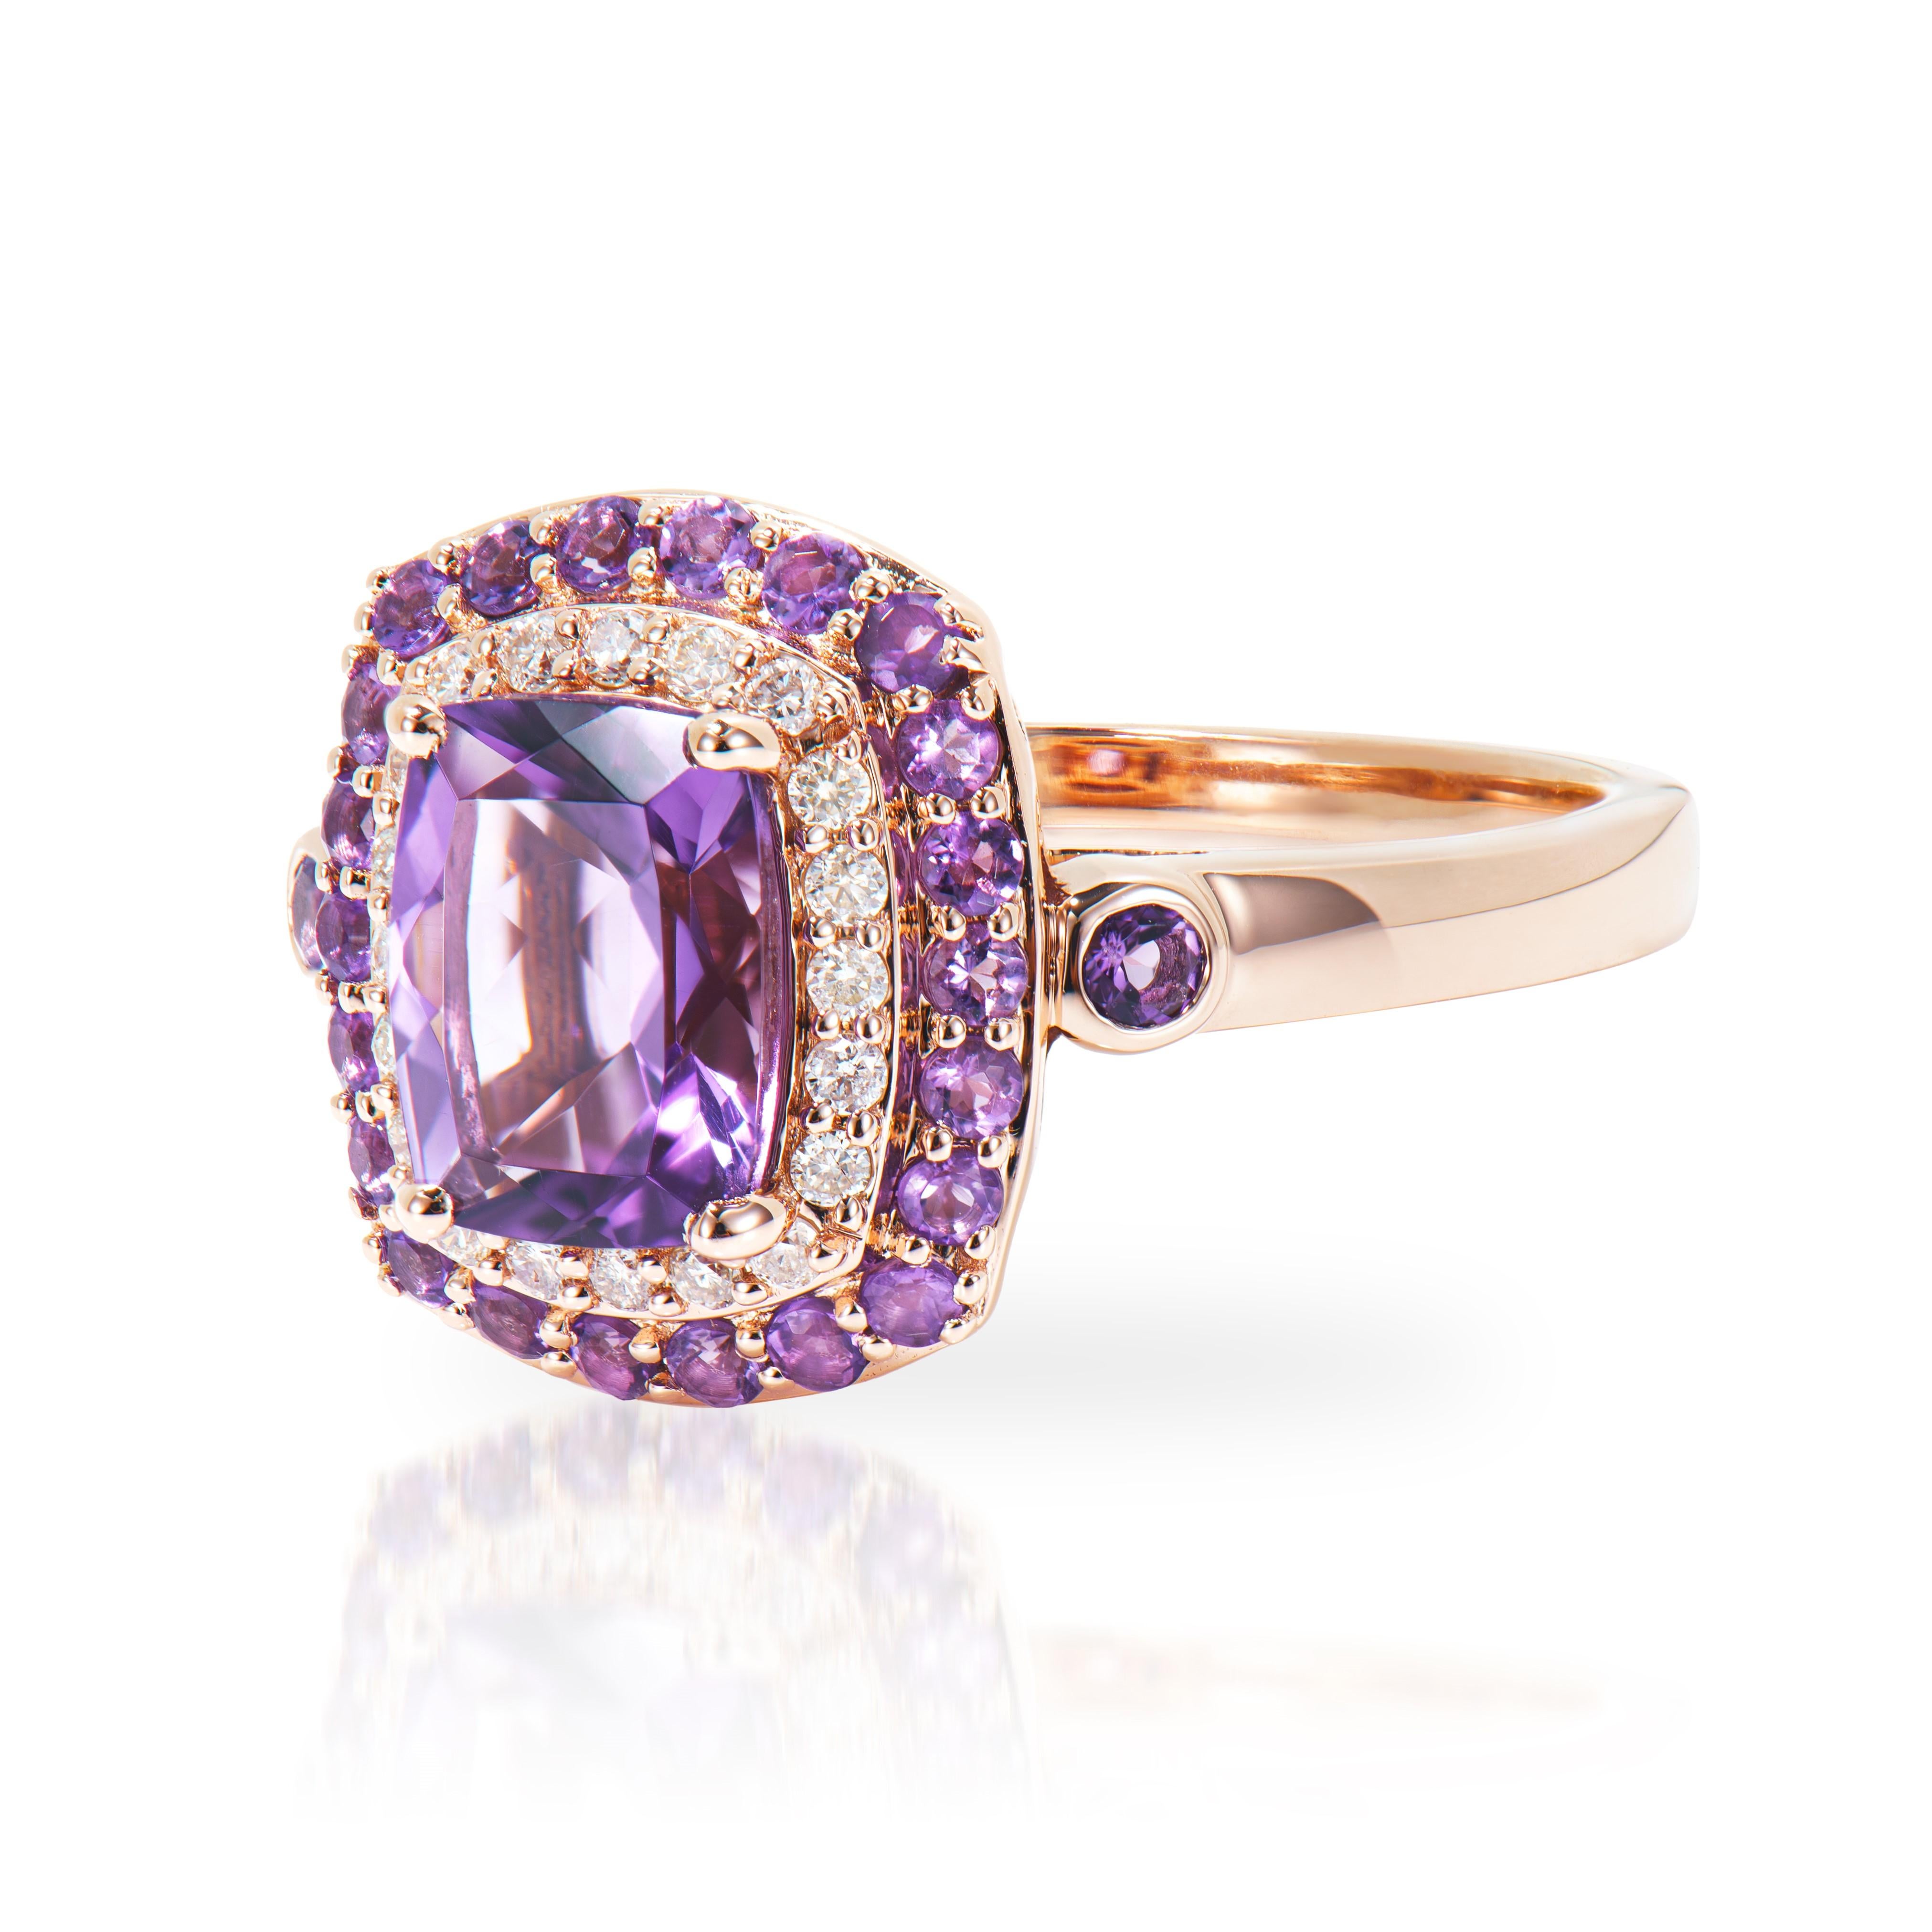 Cushion Cut 1.31 Carat Amethyst Fancy Ring in 14Karat Rose Gold with White Diamond.   For Sale